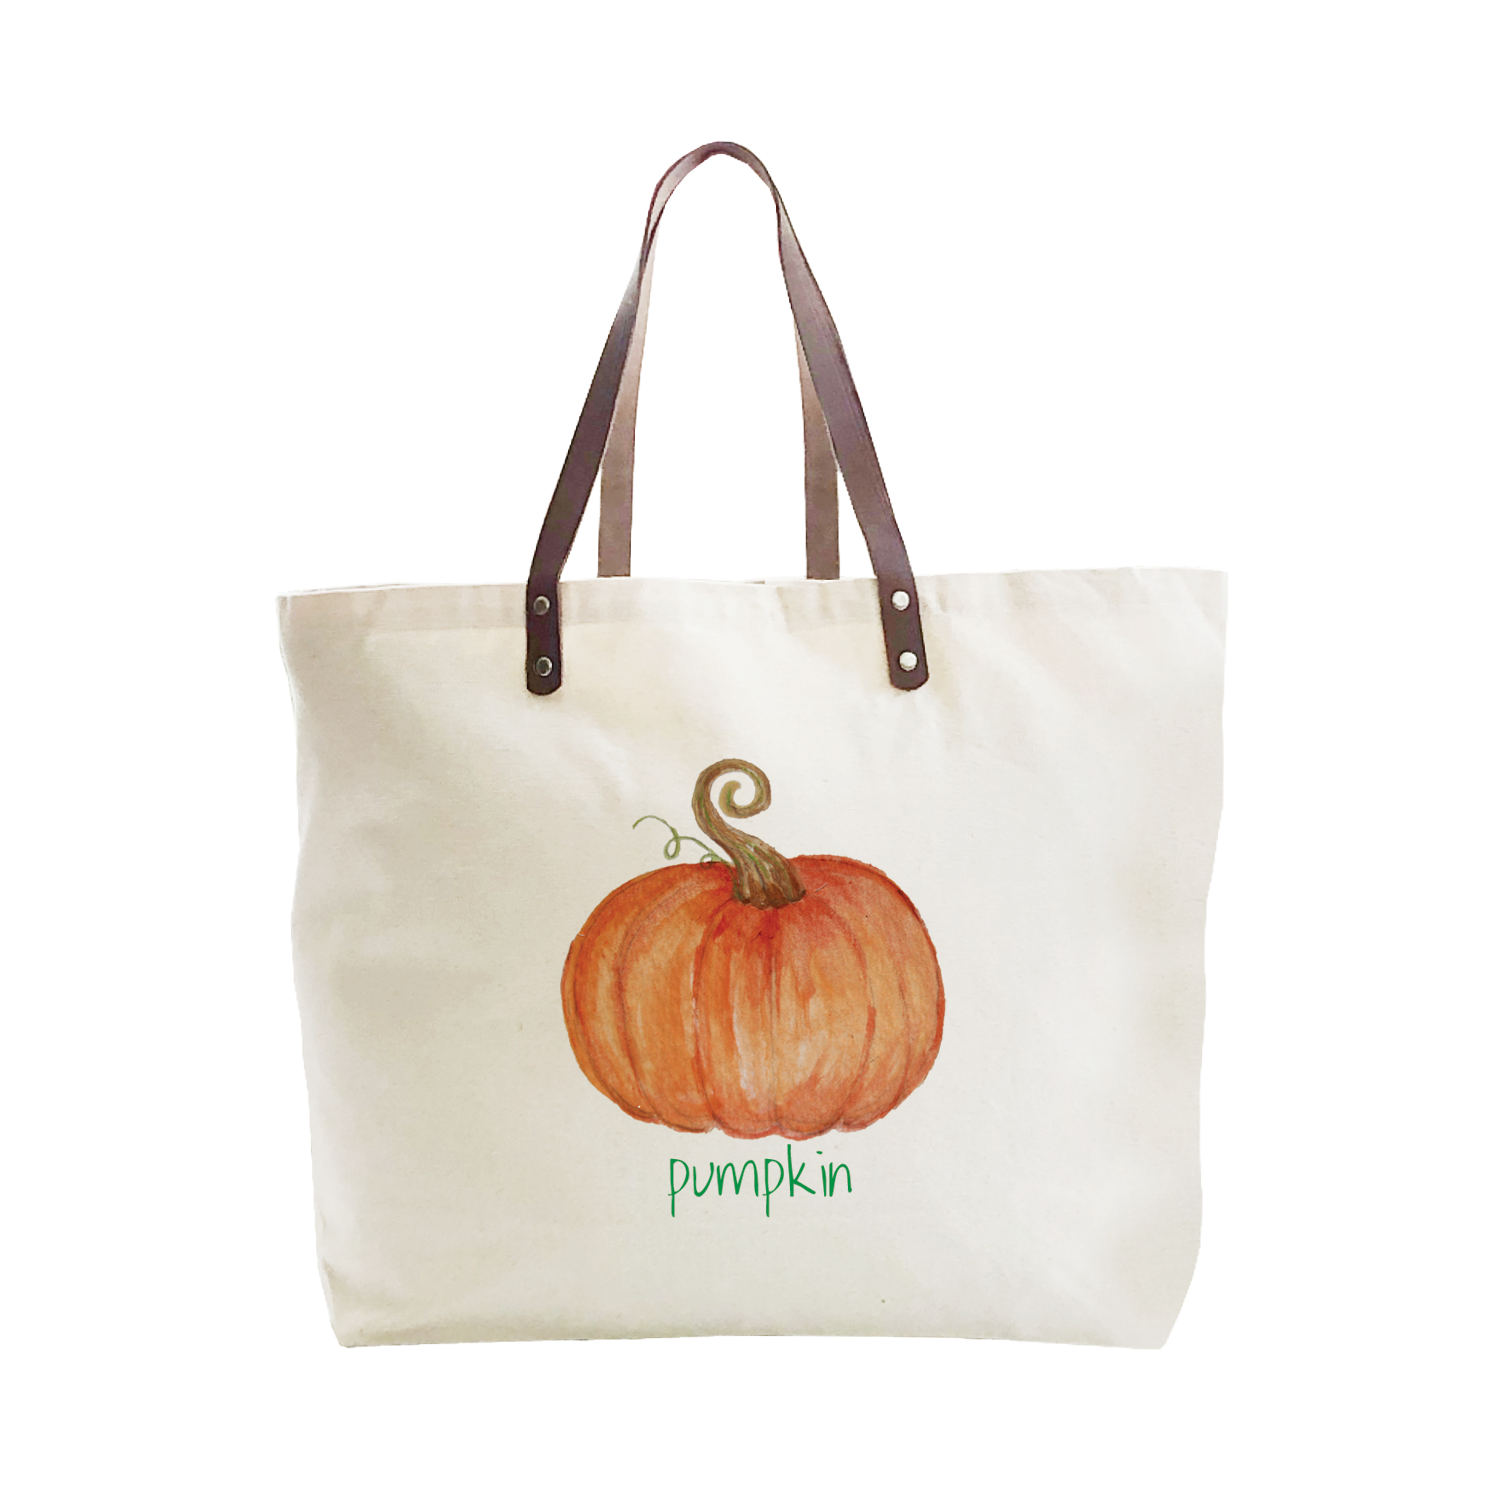 Pumpkin with pumpkin text large tote